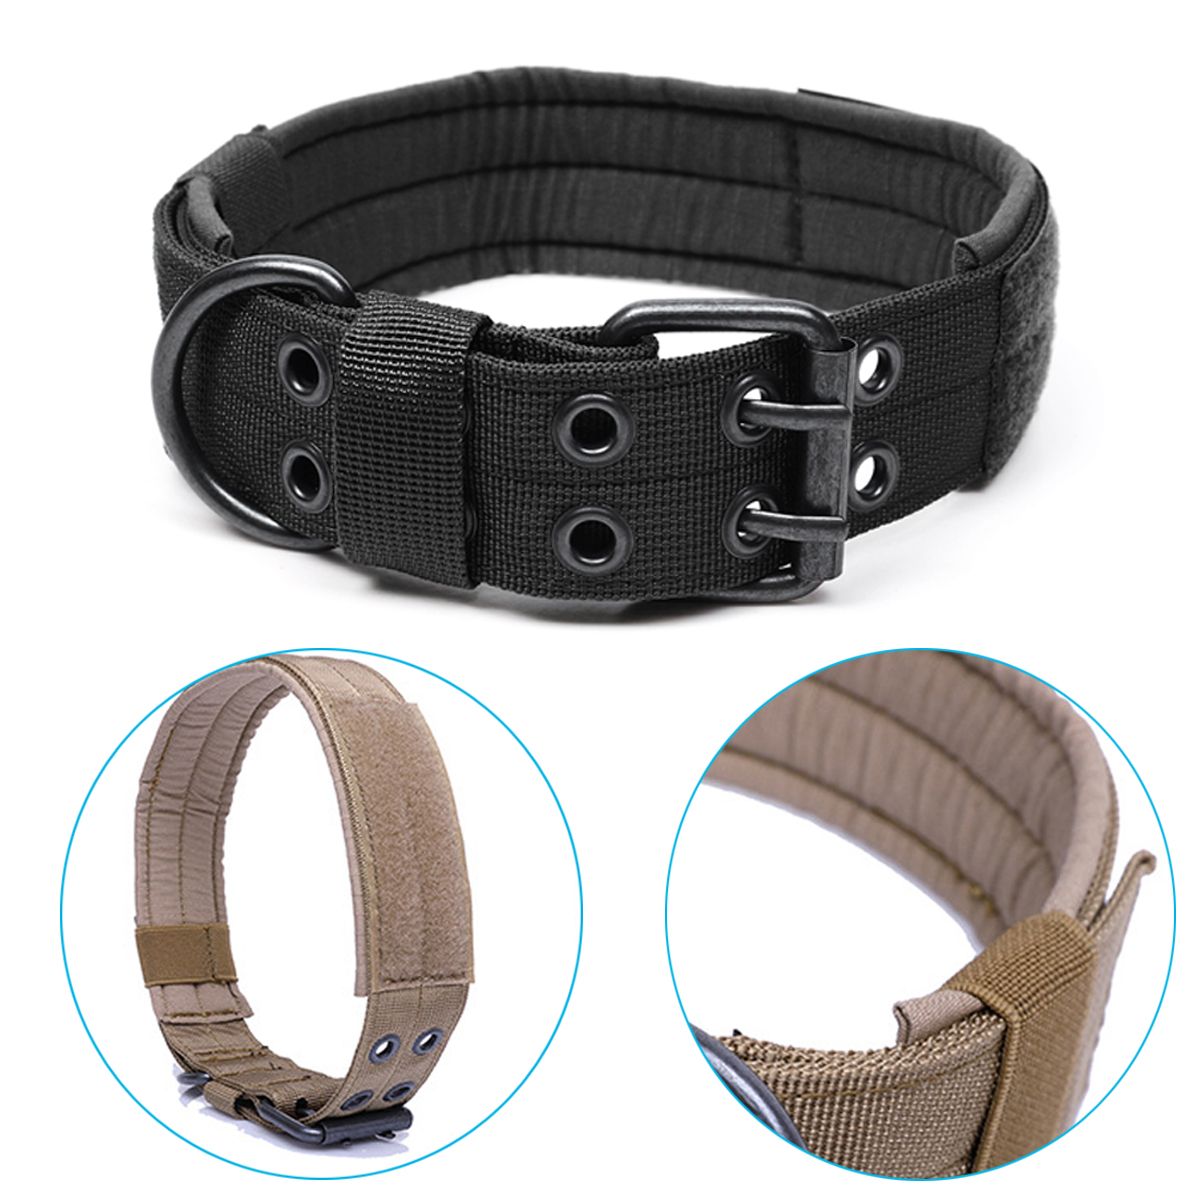 Nylon-Tactical-Dog-Collar-Military-Adjustable-Training-Dog-Collar-with-Metal-D-Ring-Buckle-M-Size-1310254